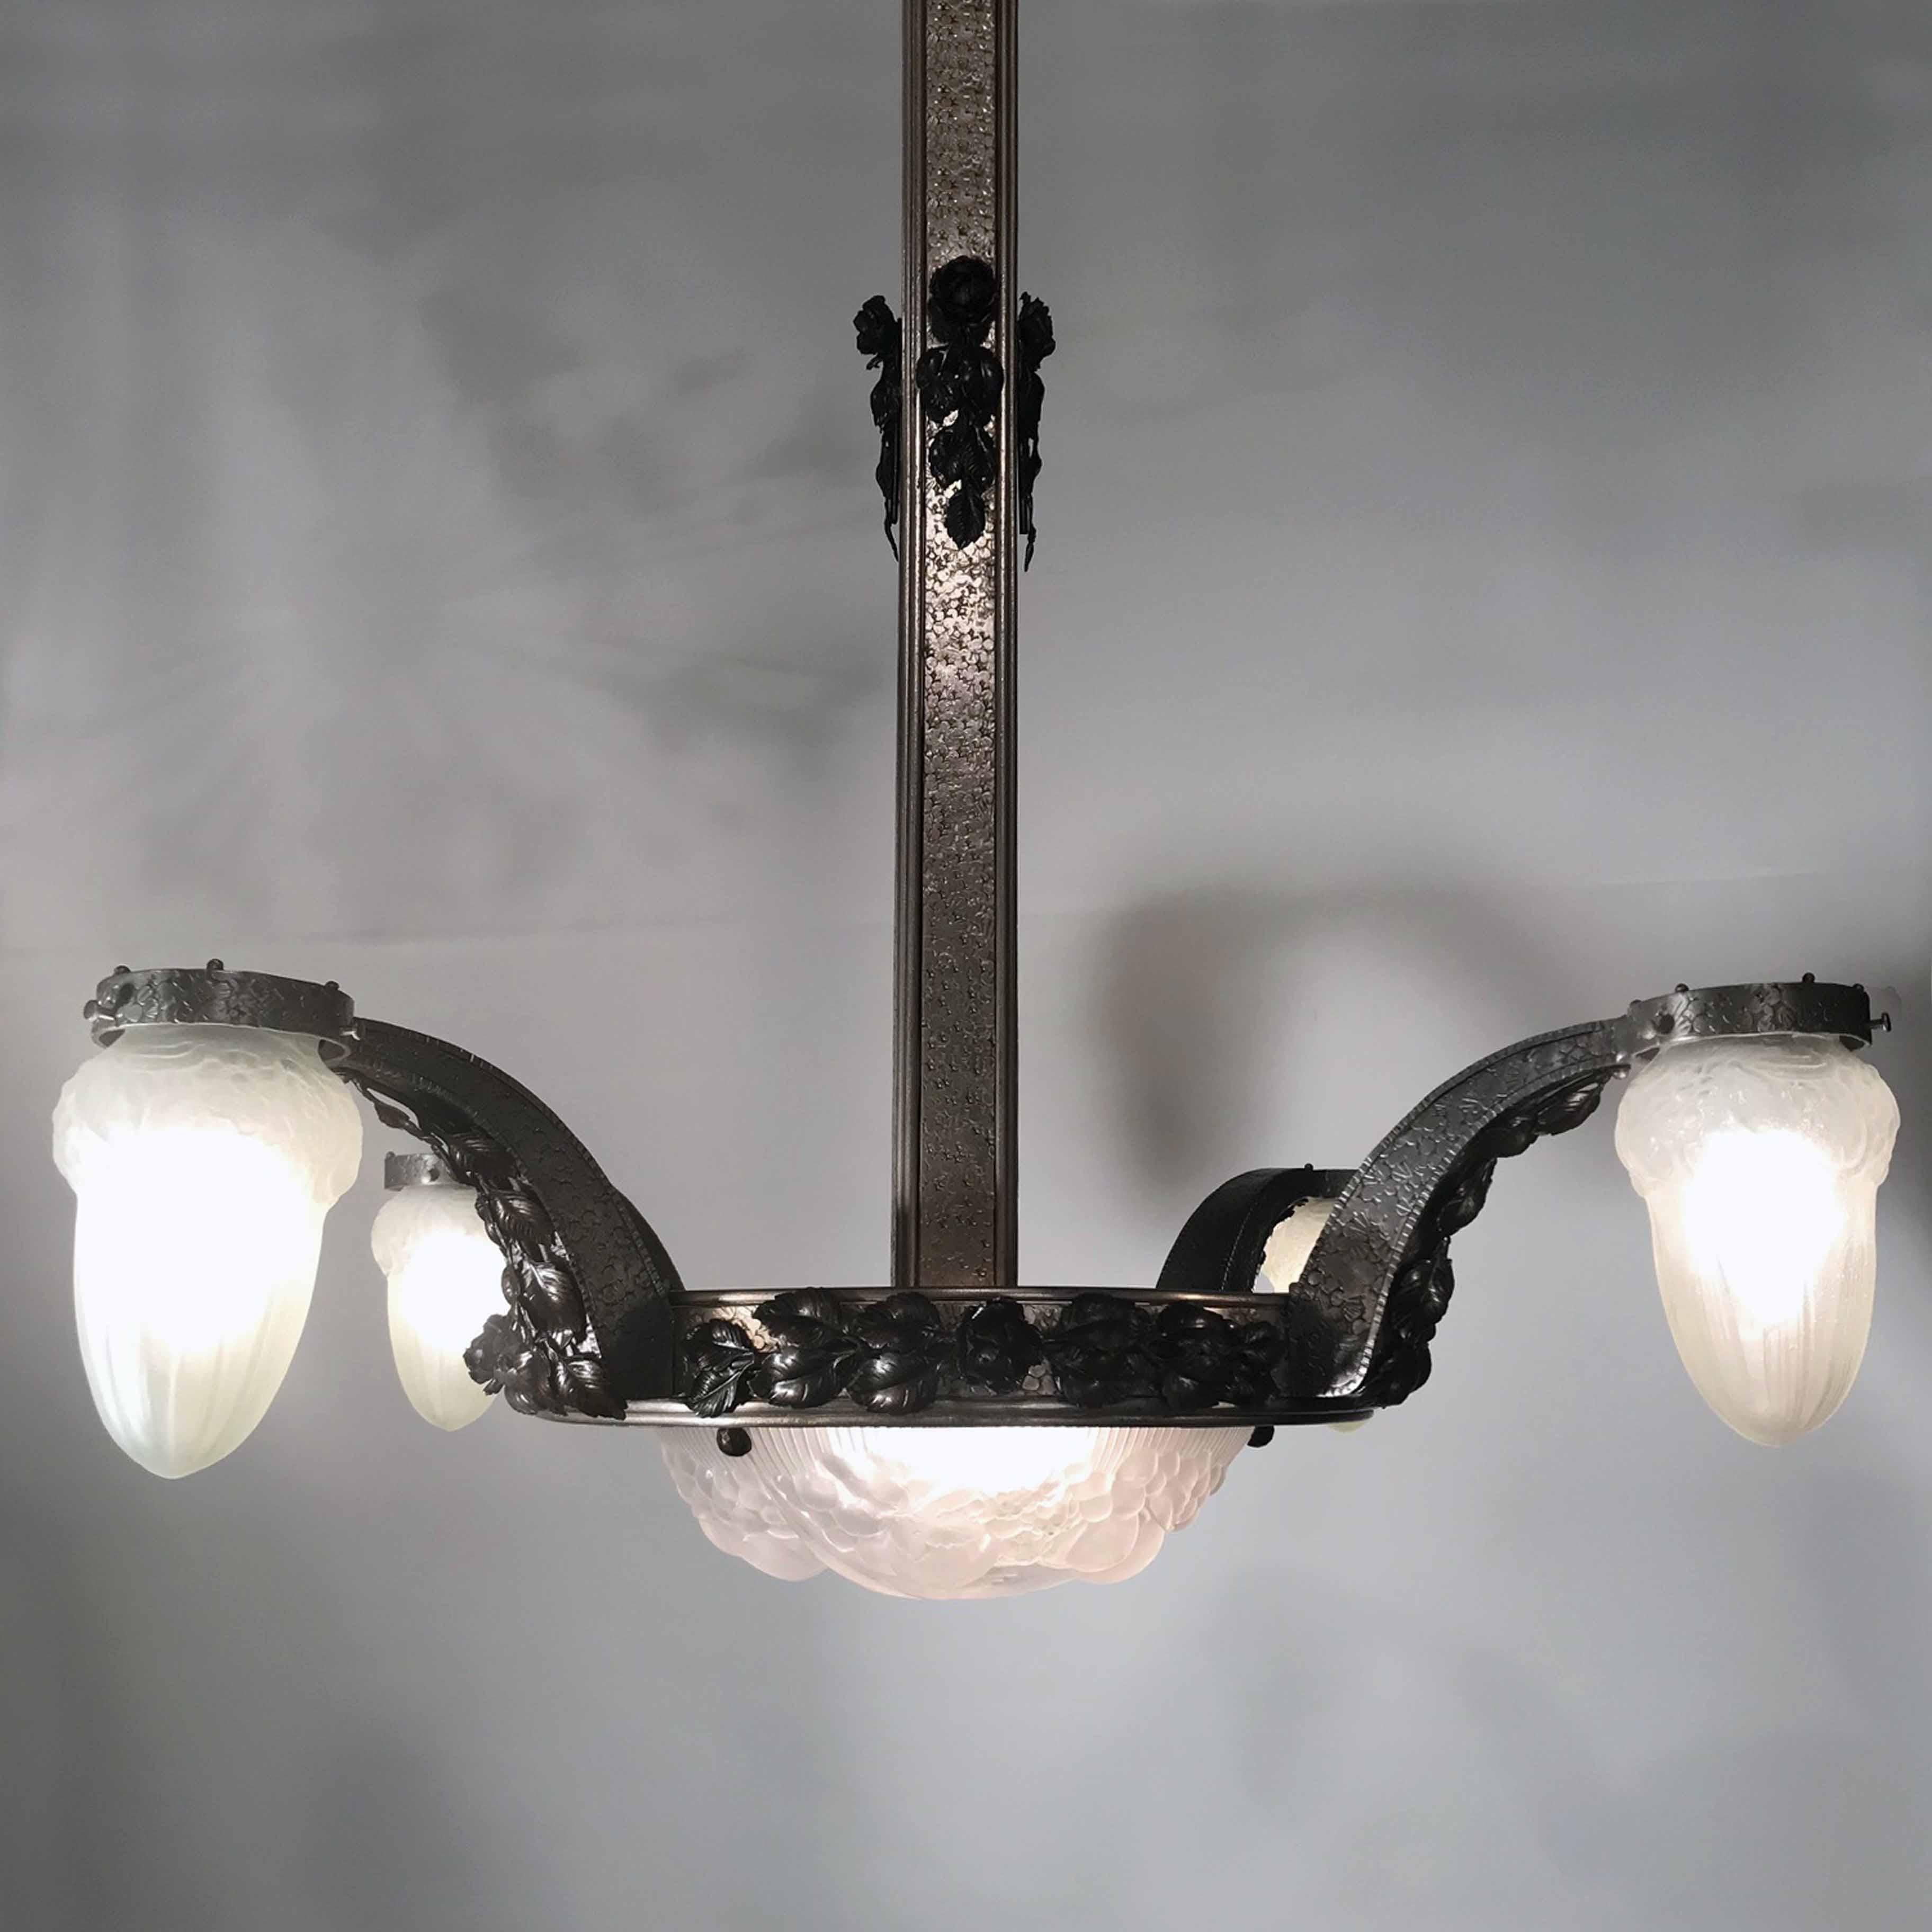 This Period Art Deco chandelier is steel with a multi textured martele finish to the stem and four shaped arms applied with leaves and floral ornament. The frosted shades and bowl are molded with berries and leaves. The contrast between the hardness